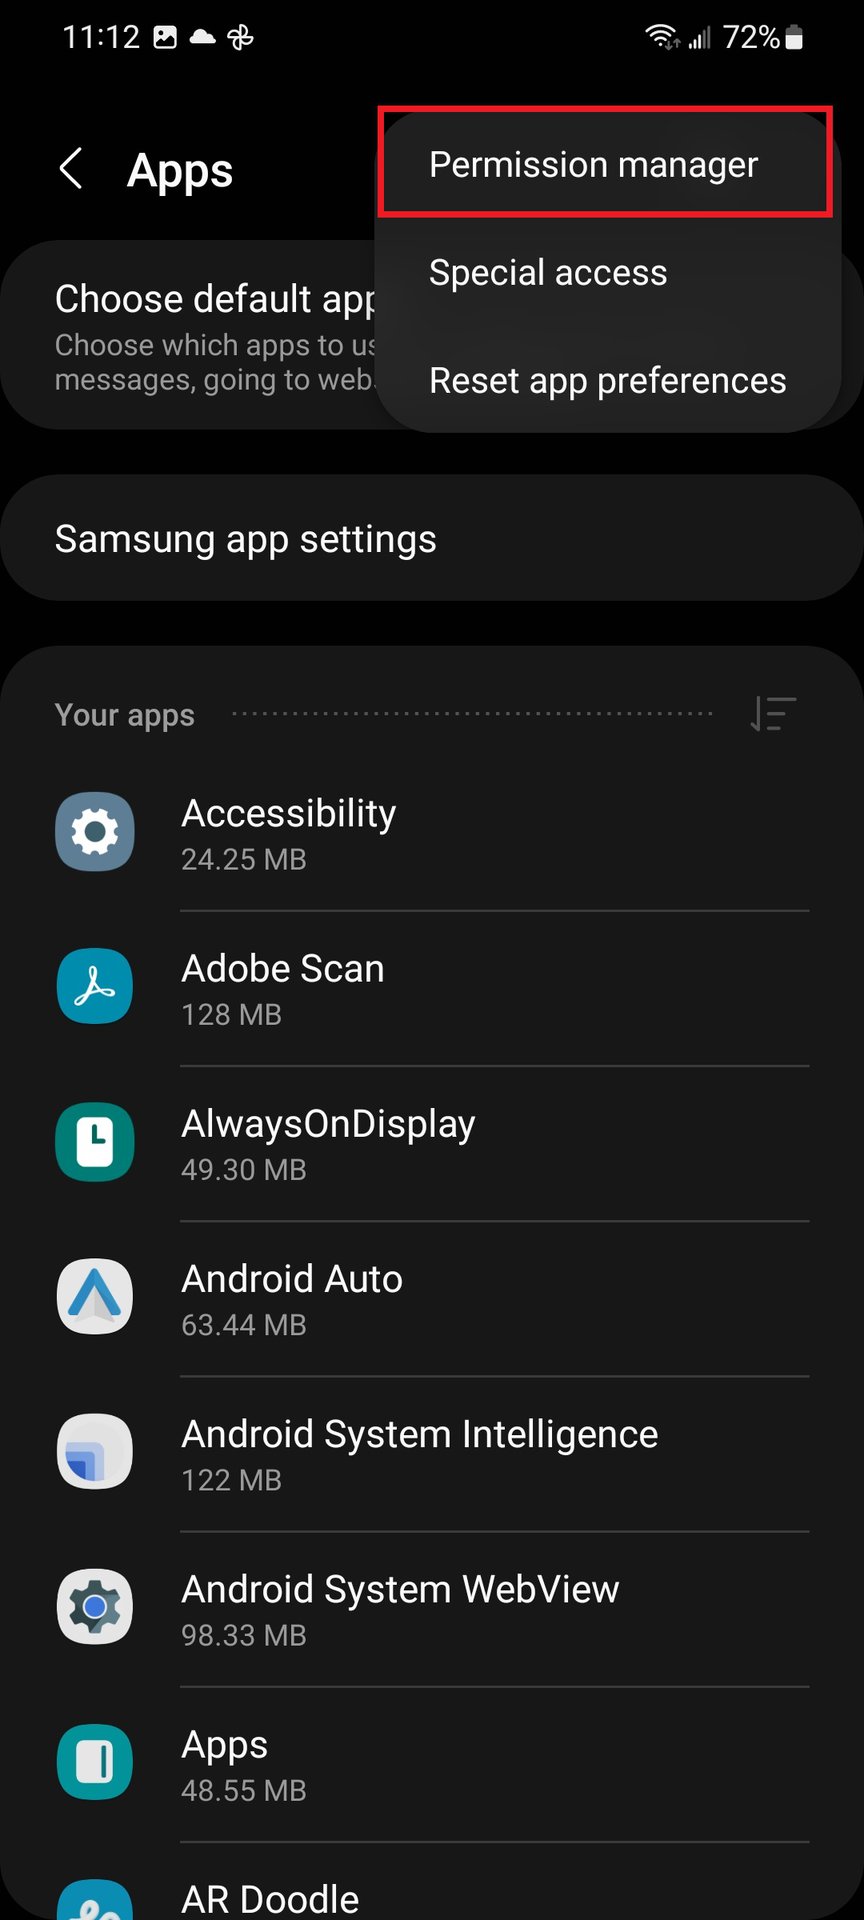 samsung apps settings permission manager